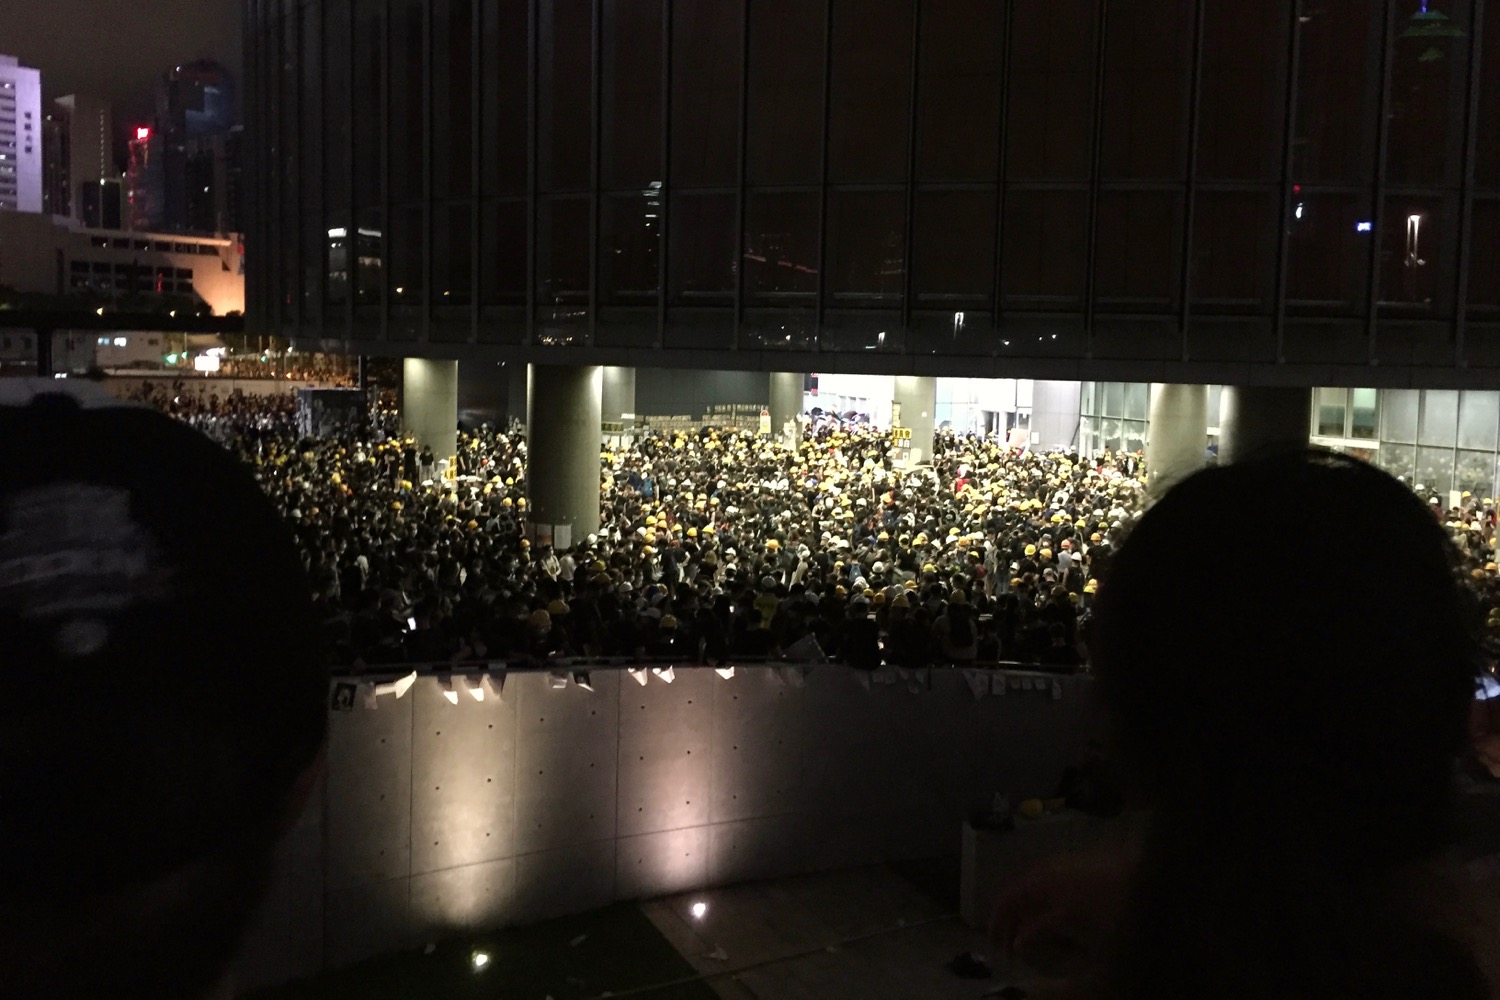 A crowd of protesters waits outside of the Legislative Council on July 1 after demonstrators forced their way into the building. Photo by Stuart White.